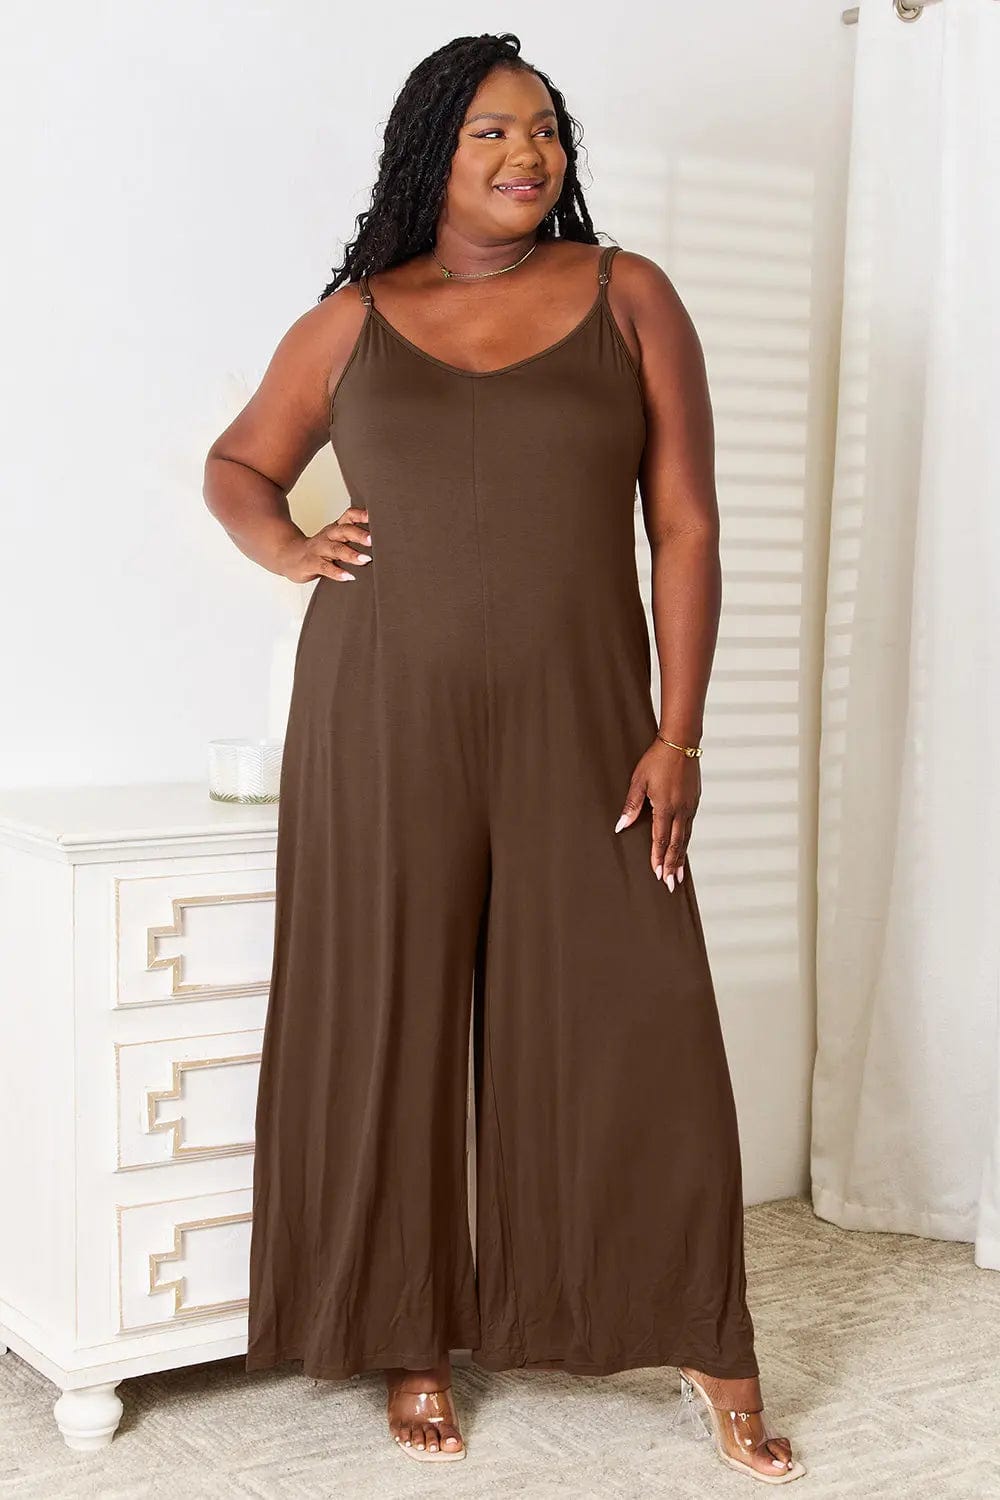 Double Take Full Size Soft Rayon Spaghetti Strap Tied Wide Leg Jumpsuit  35.00 MPGD Corp Merchandise